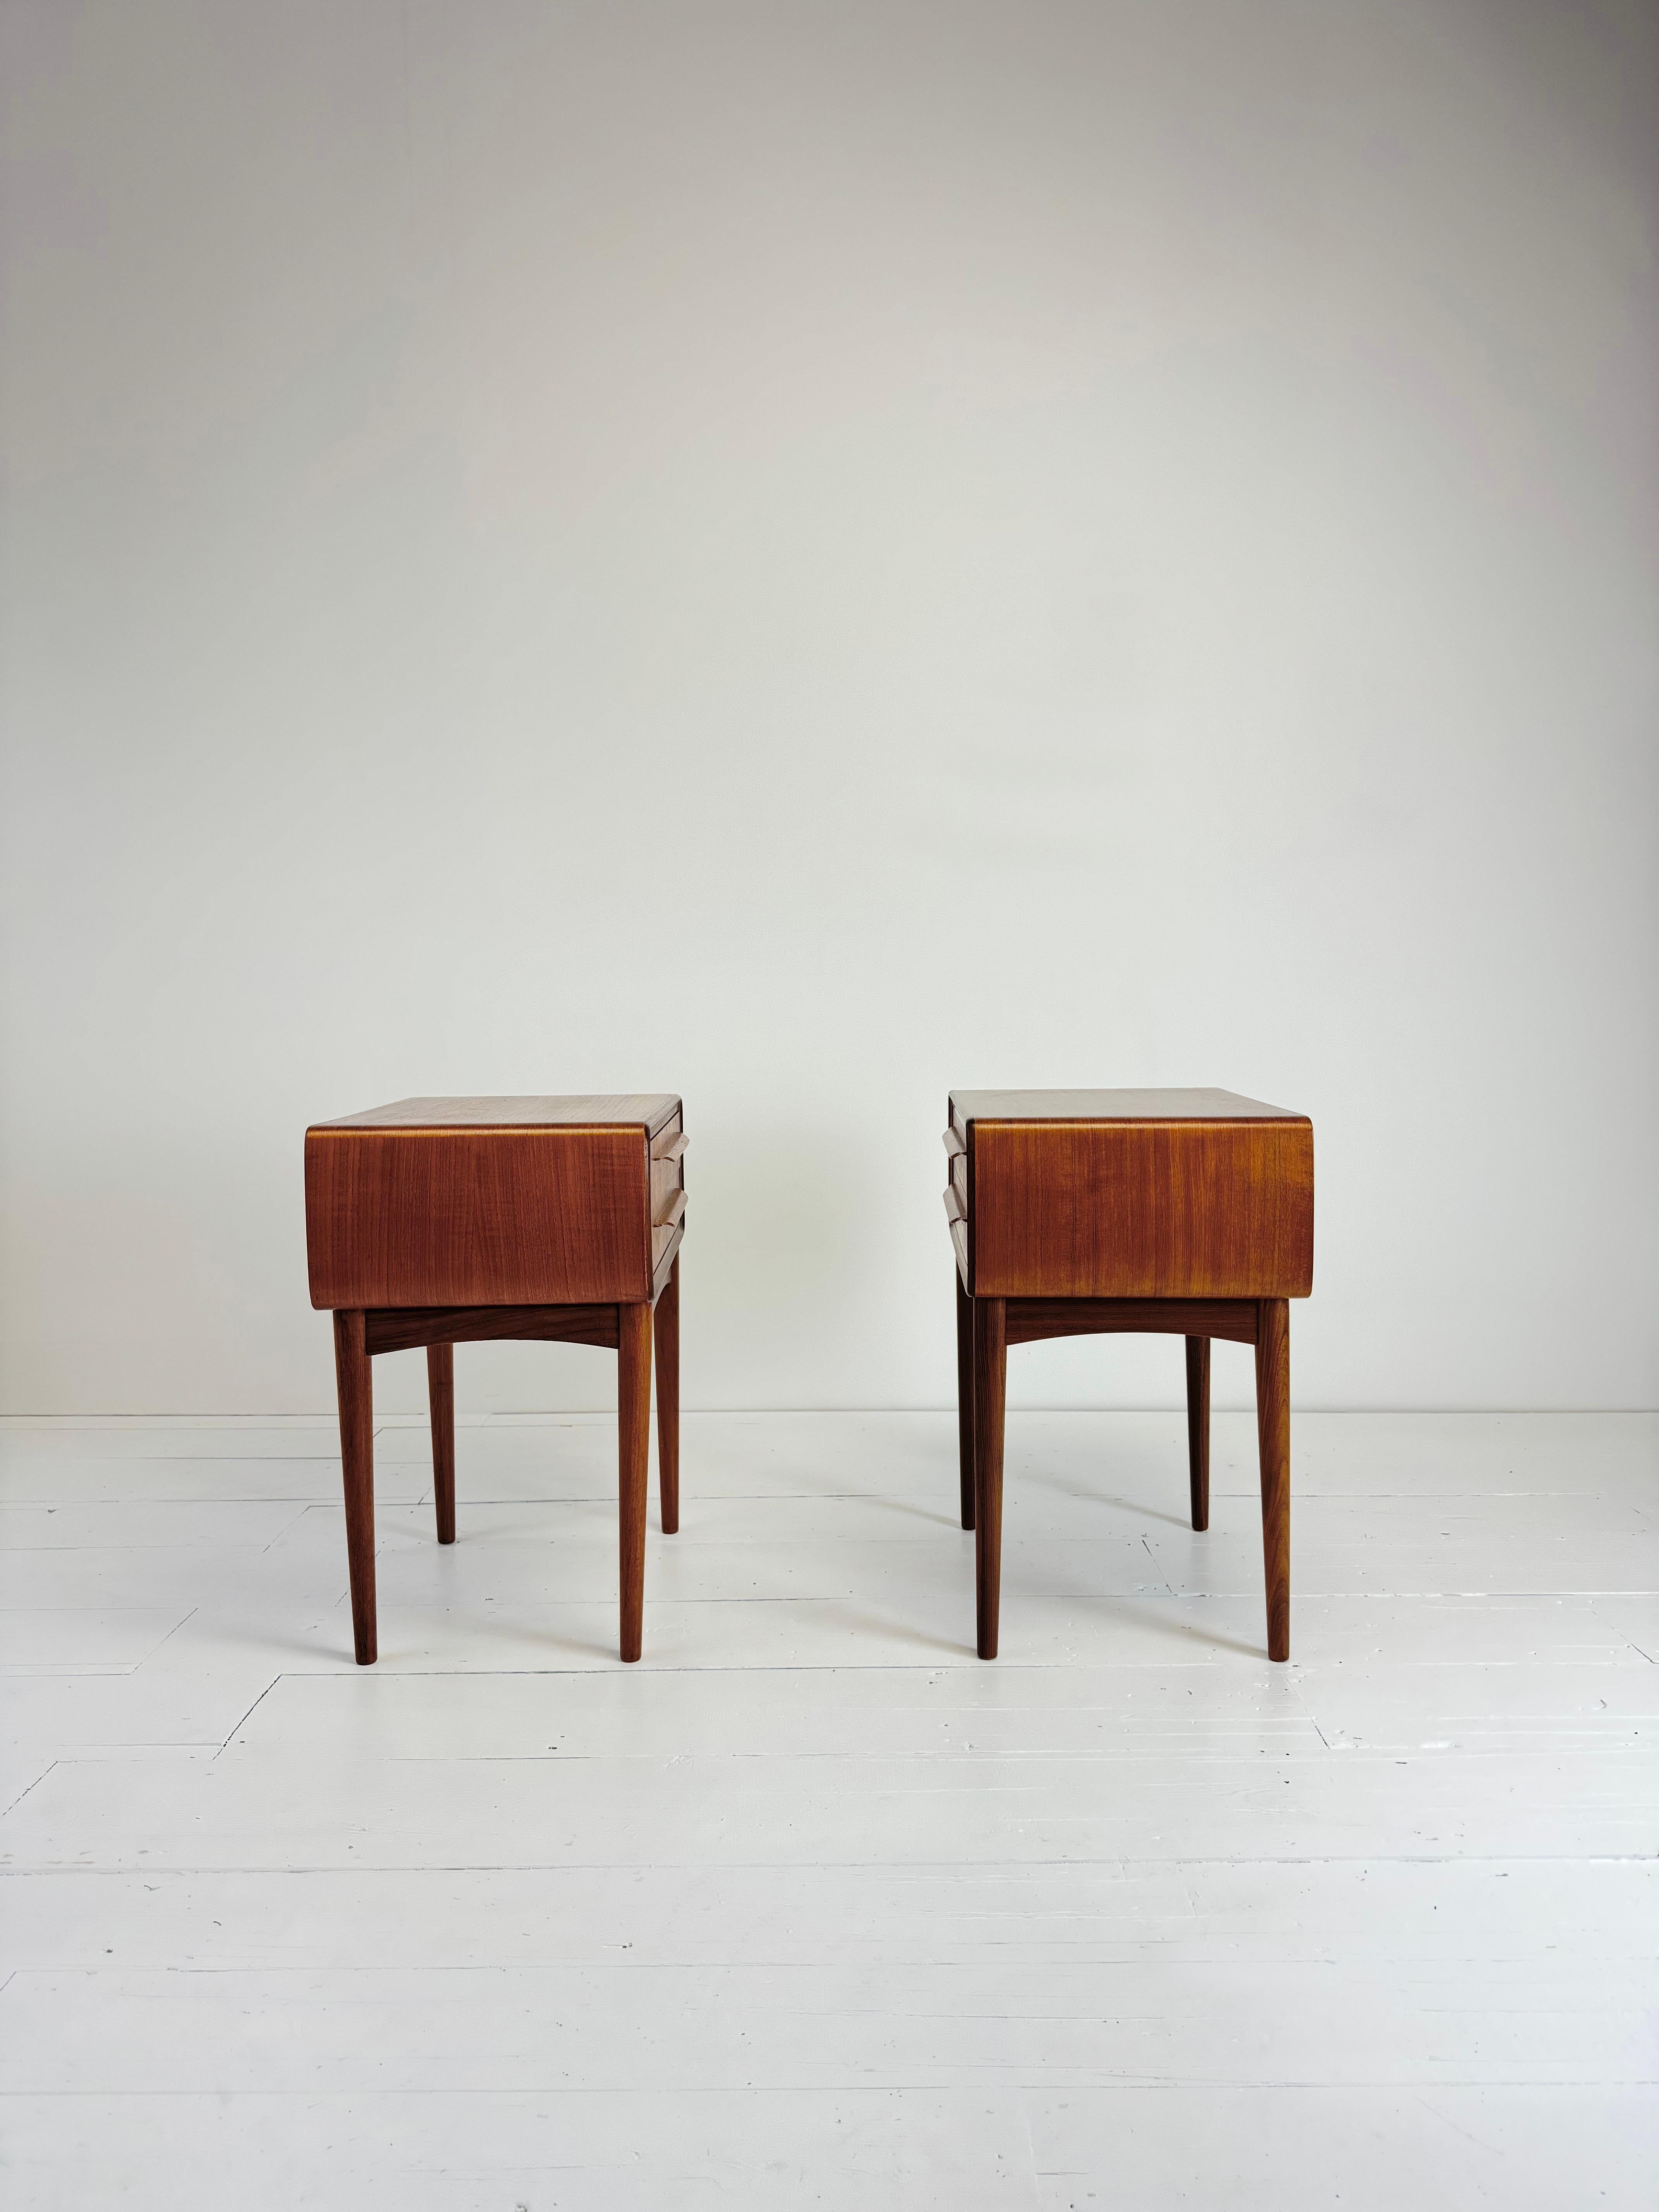 Polished A Pair of Teak Night Stands by Johaness Andersen c.1960's For Sale